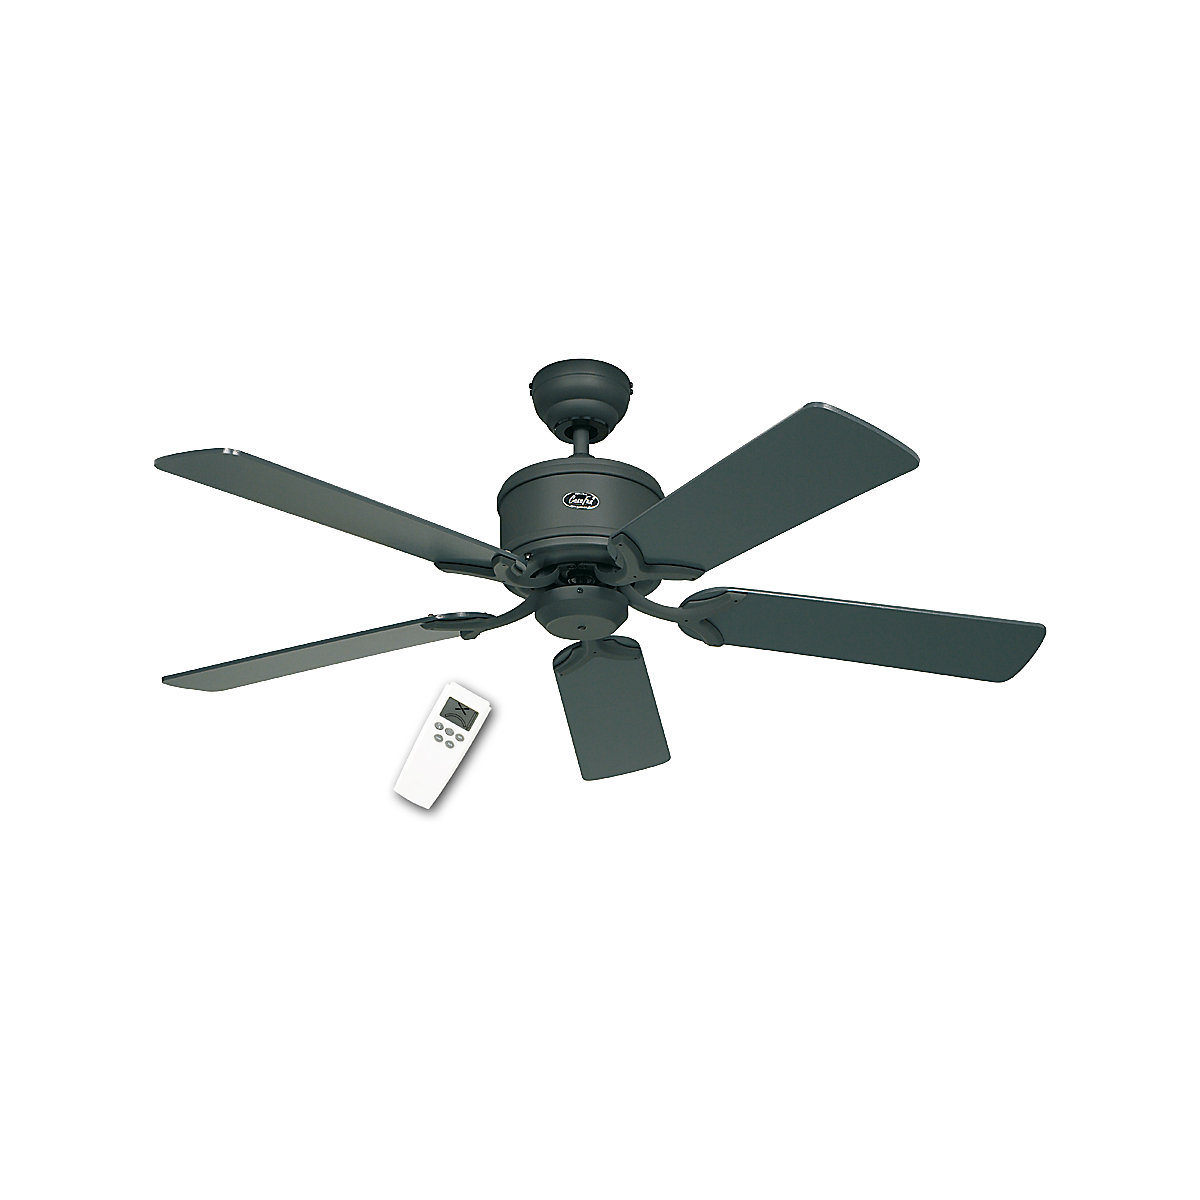 ECO ELEMENTS ceiling fan, rotor blade Ø 1320 mm, painted graphite / painted black-4